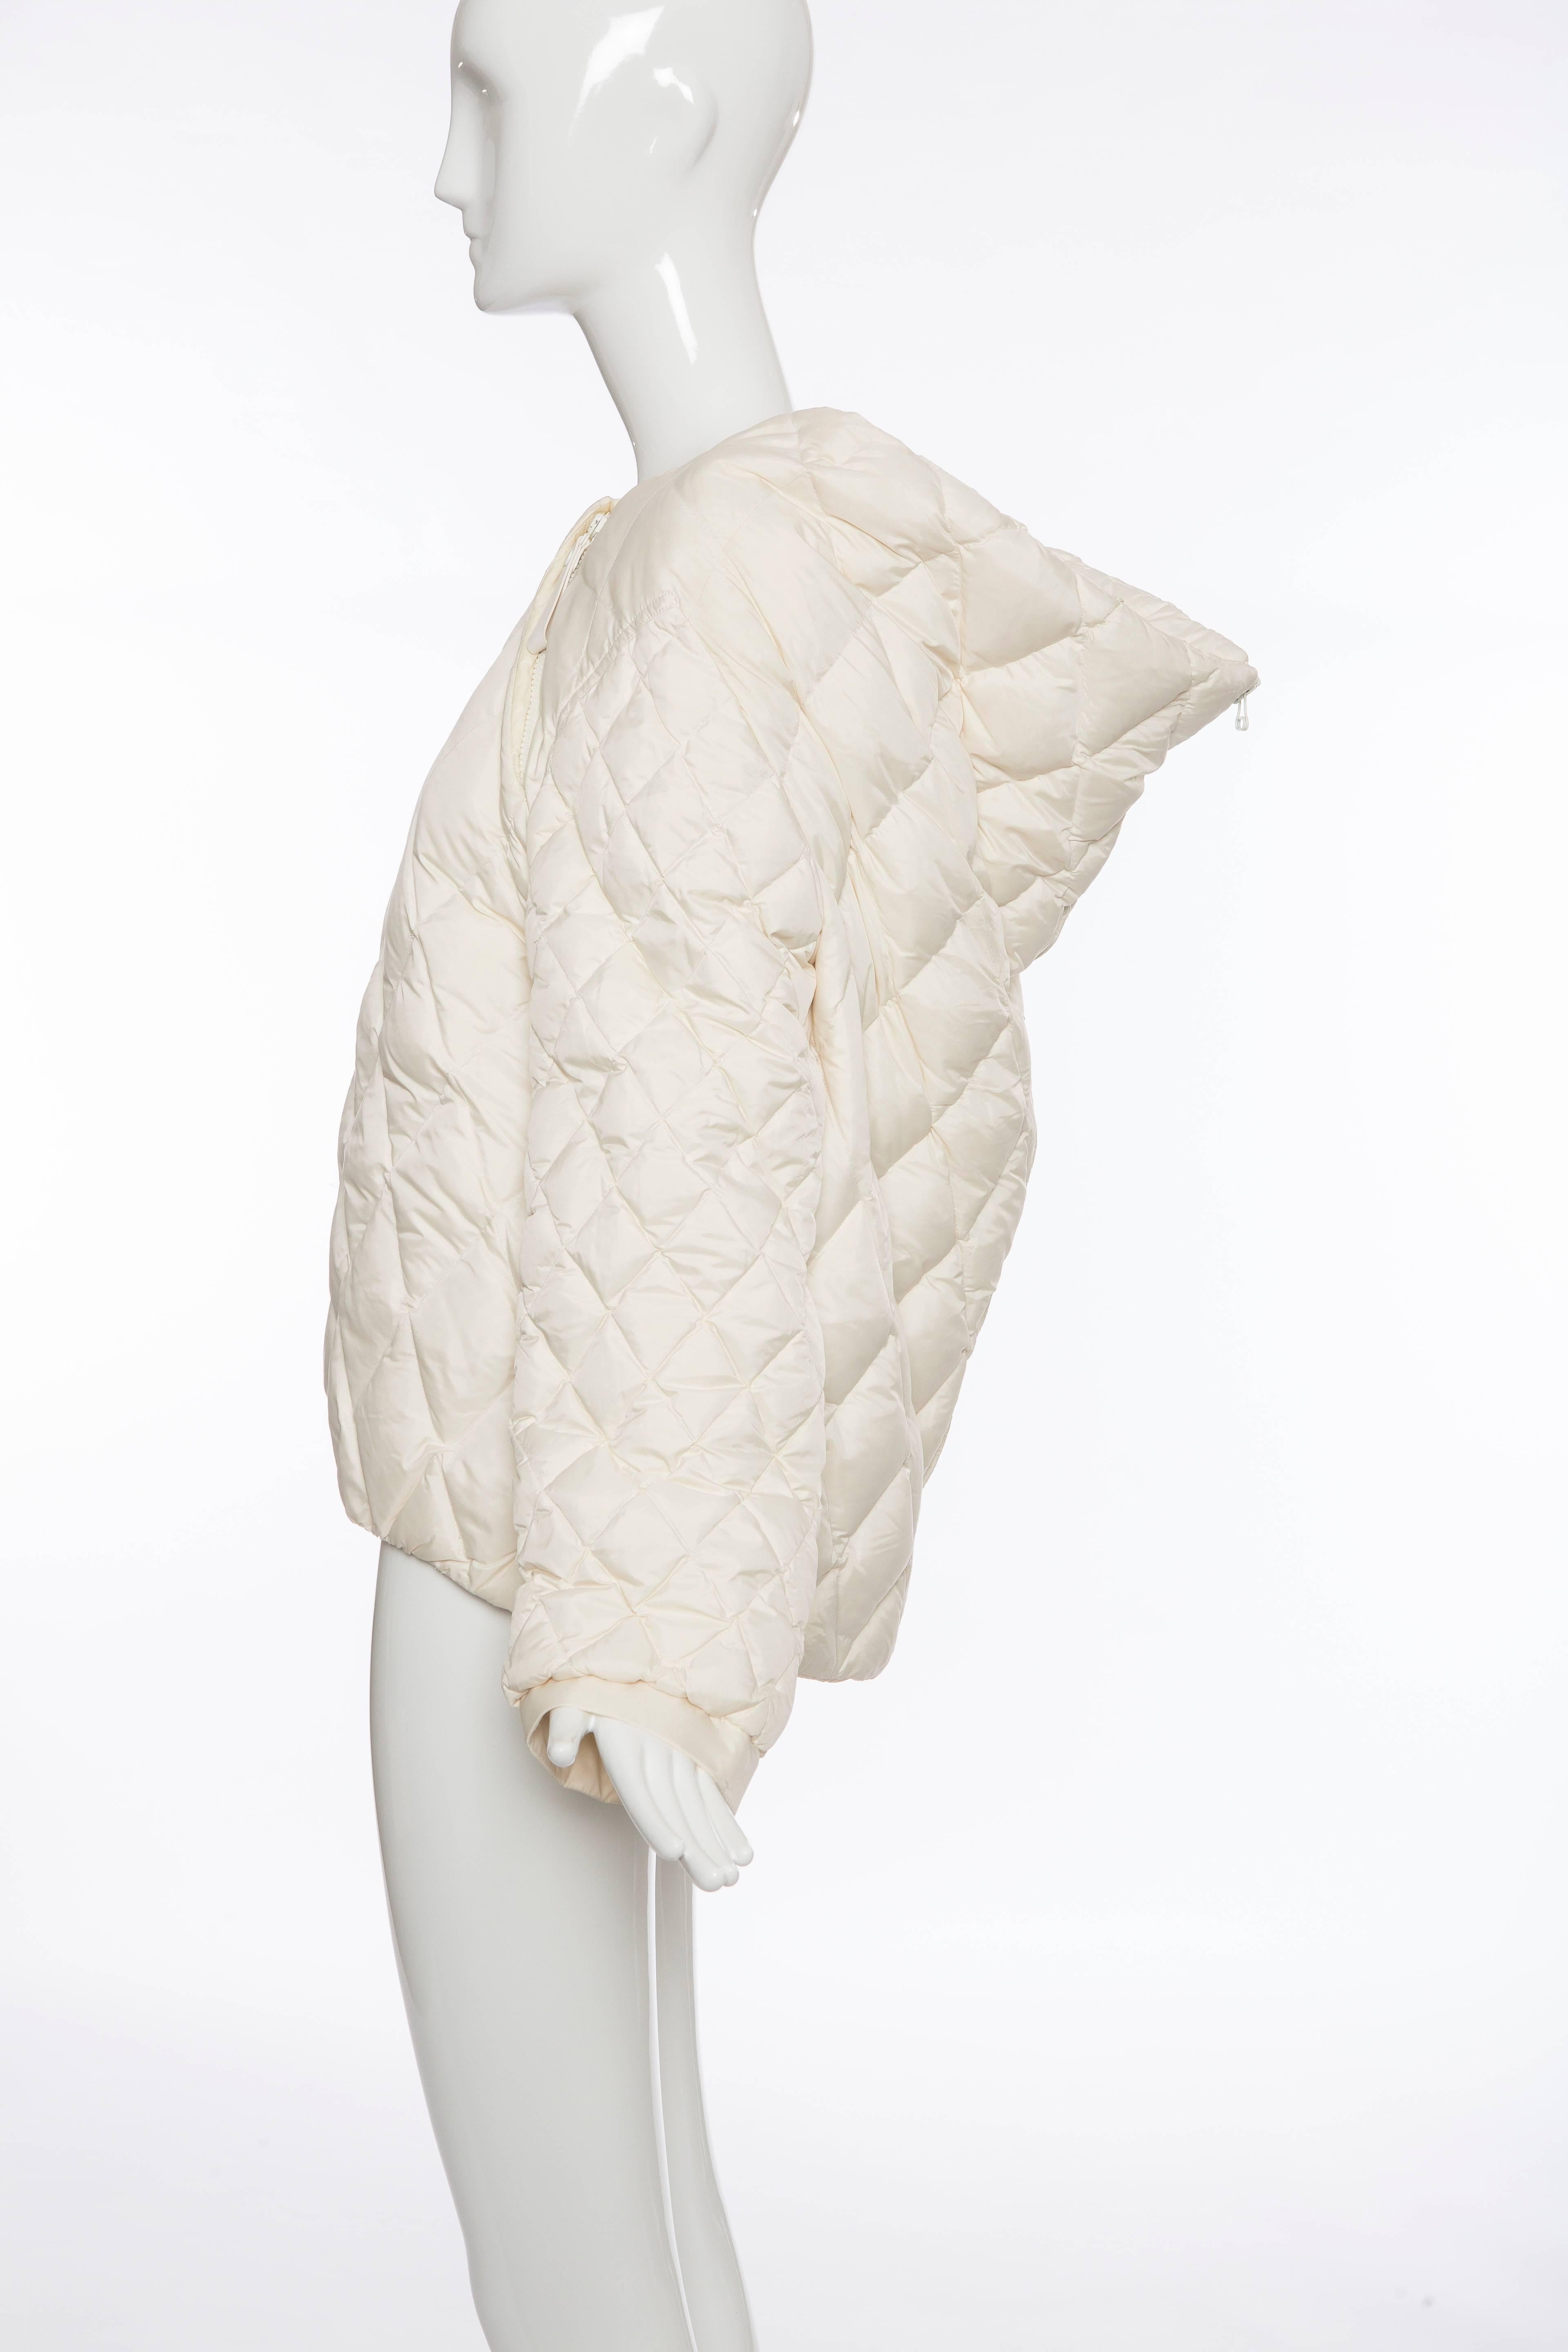 Balenciaga by Nicolas Ghesquière, Autumn/Winter 2010 cream quilted puffer coat with attached underlay, zip closure at back and diagonal zip closure at neckline.

 Size not listed, estimated from measurements.

Bust 40”, Waist 40”, Shoulder 17”,